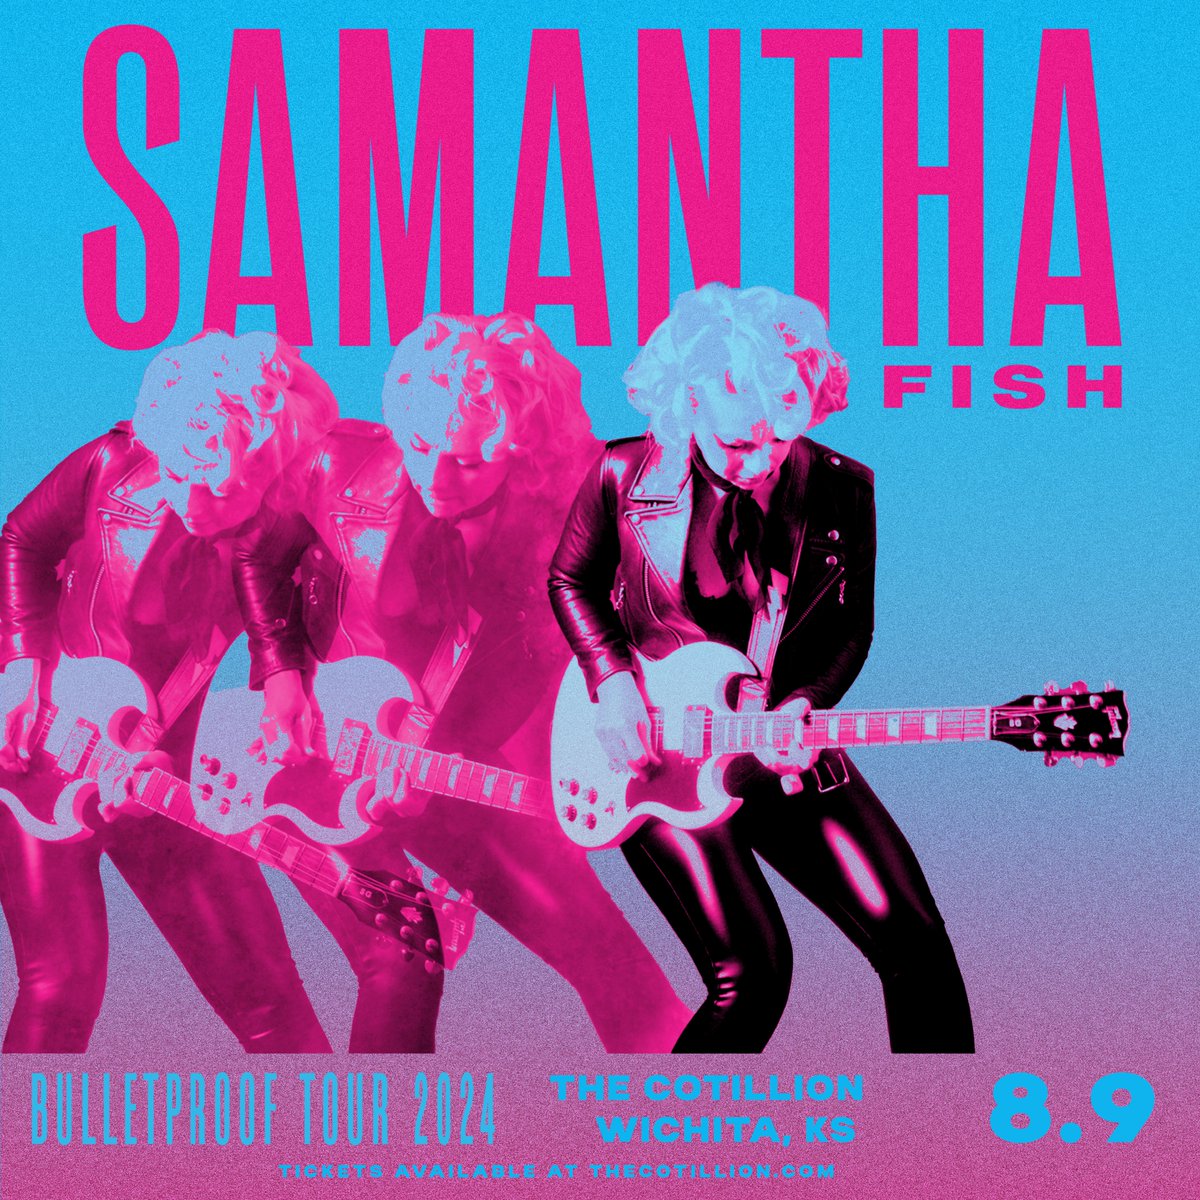 🚨ANNOUNCEMENT!🚨 @Samantha_Fish is making her way back to The Cotillion with the Bulletproof Tour on August 9th! Tickets are on sale FRIDAY 4/26 at 10am at thecotillion.com 🎟